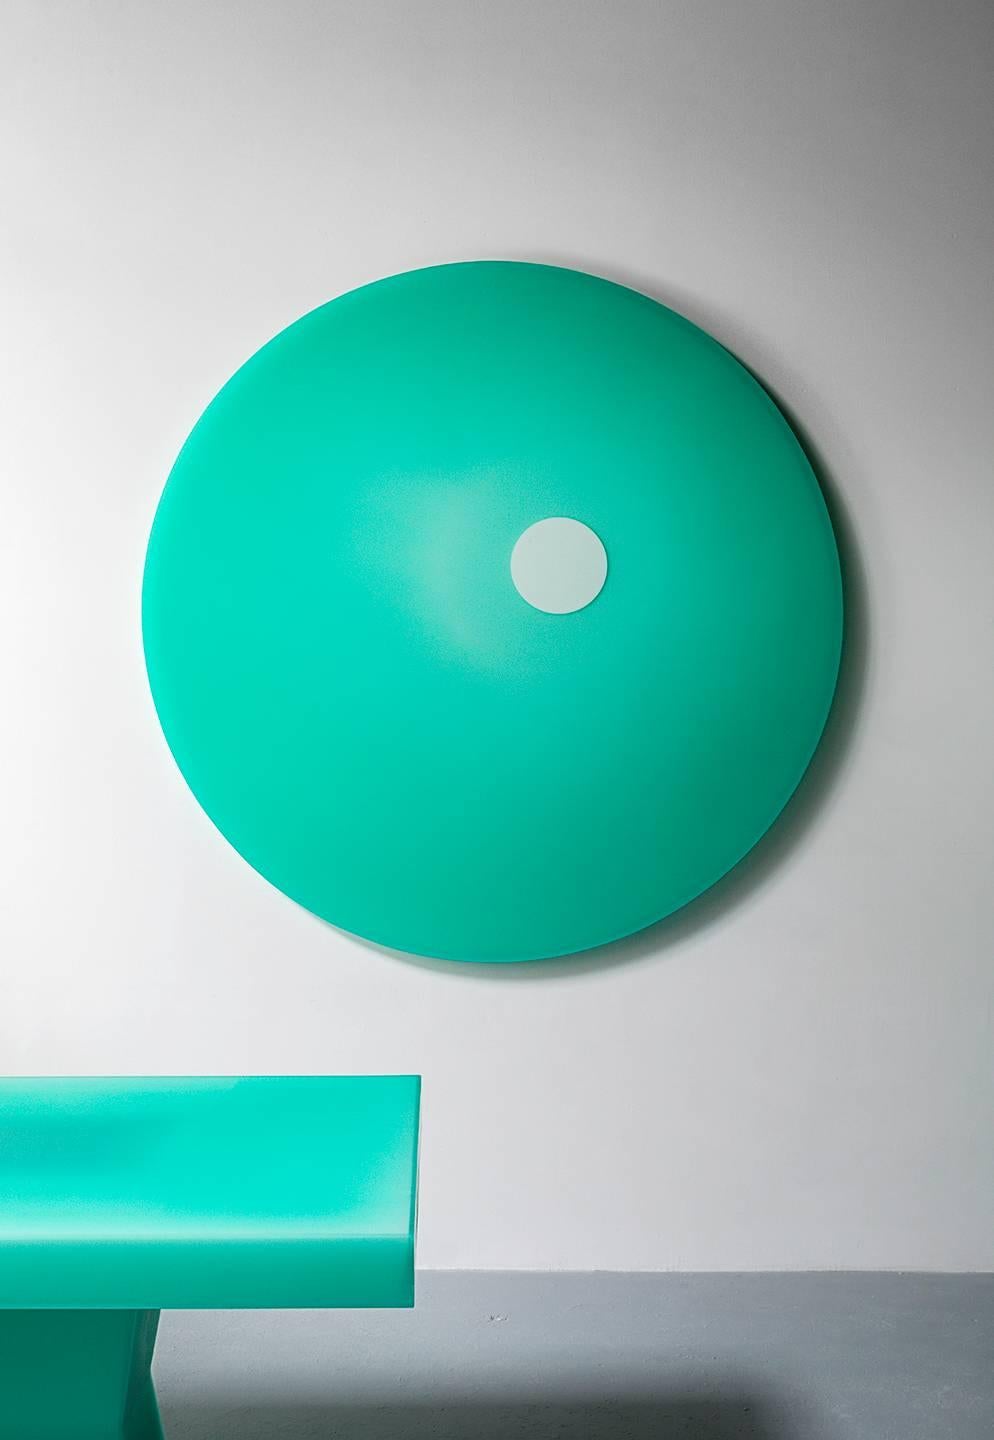 This wall piece uses Facture Studio's Shift style to transition seamlessly from a deep opaque to water clear green over a white core with an offset shift to a round almost white circle. The exterior facets are sanded to a buttery smooth finish. This